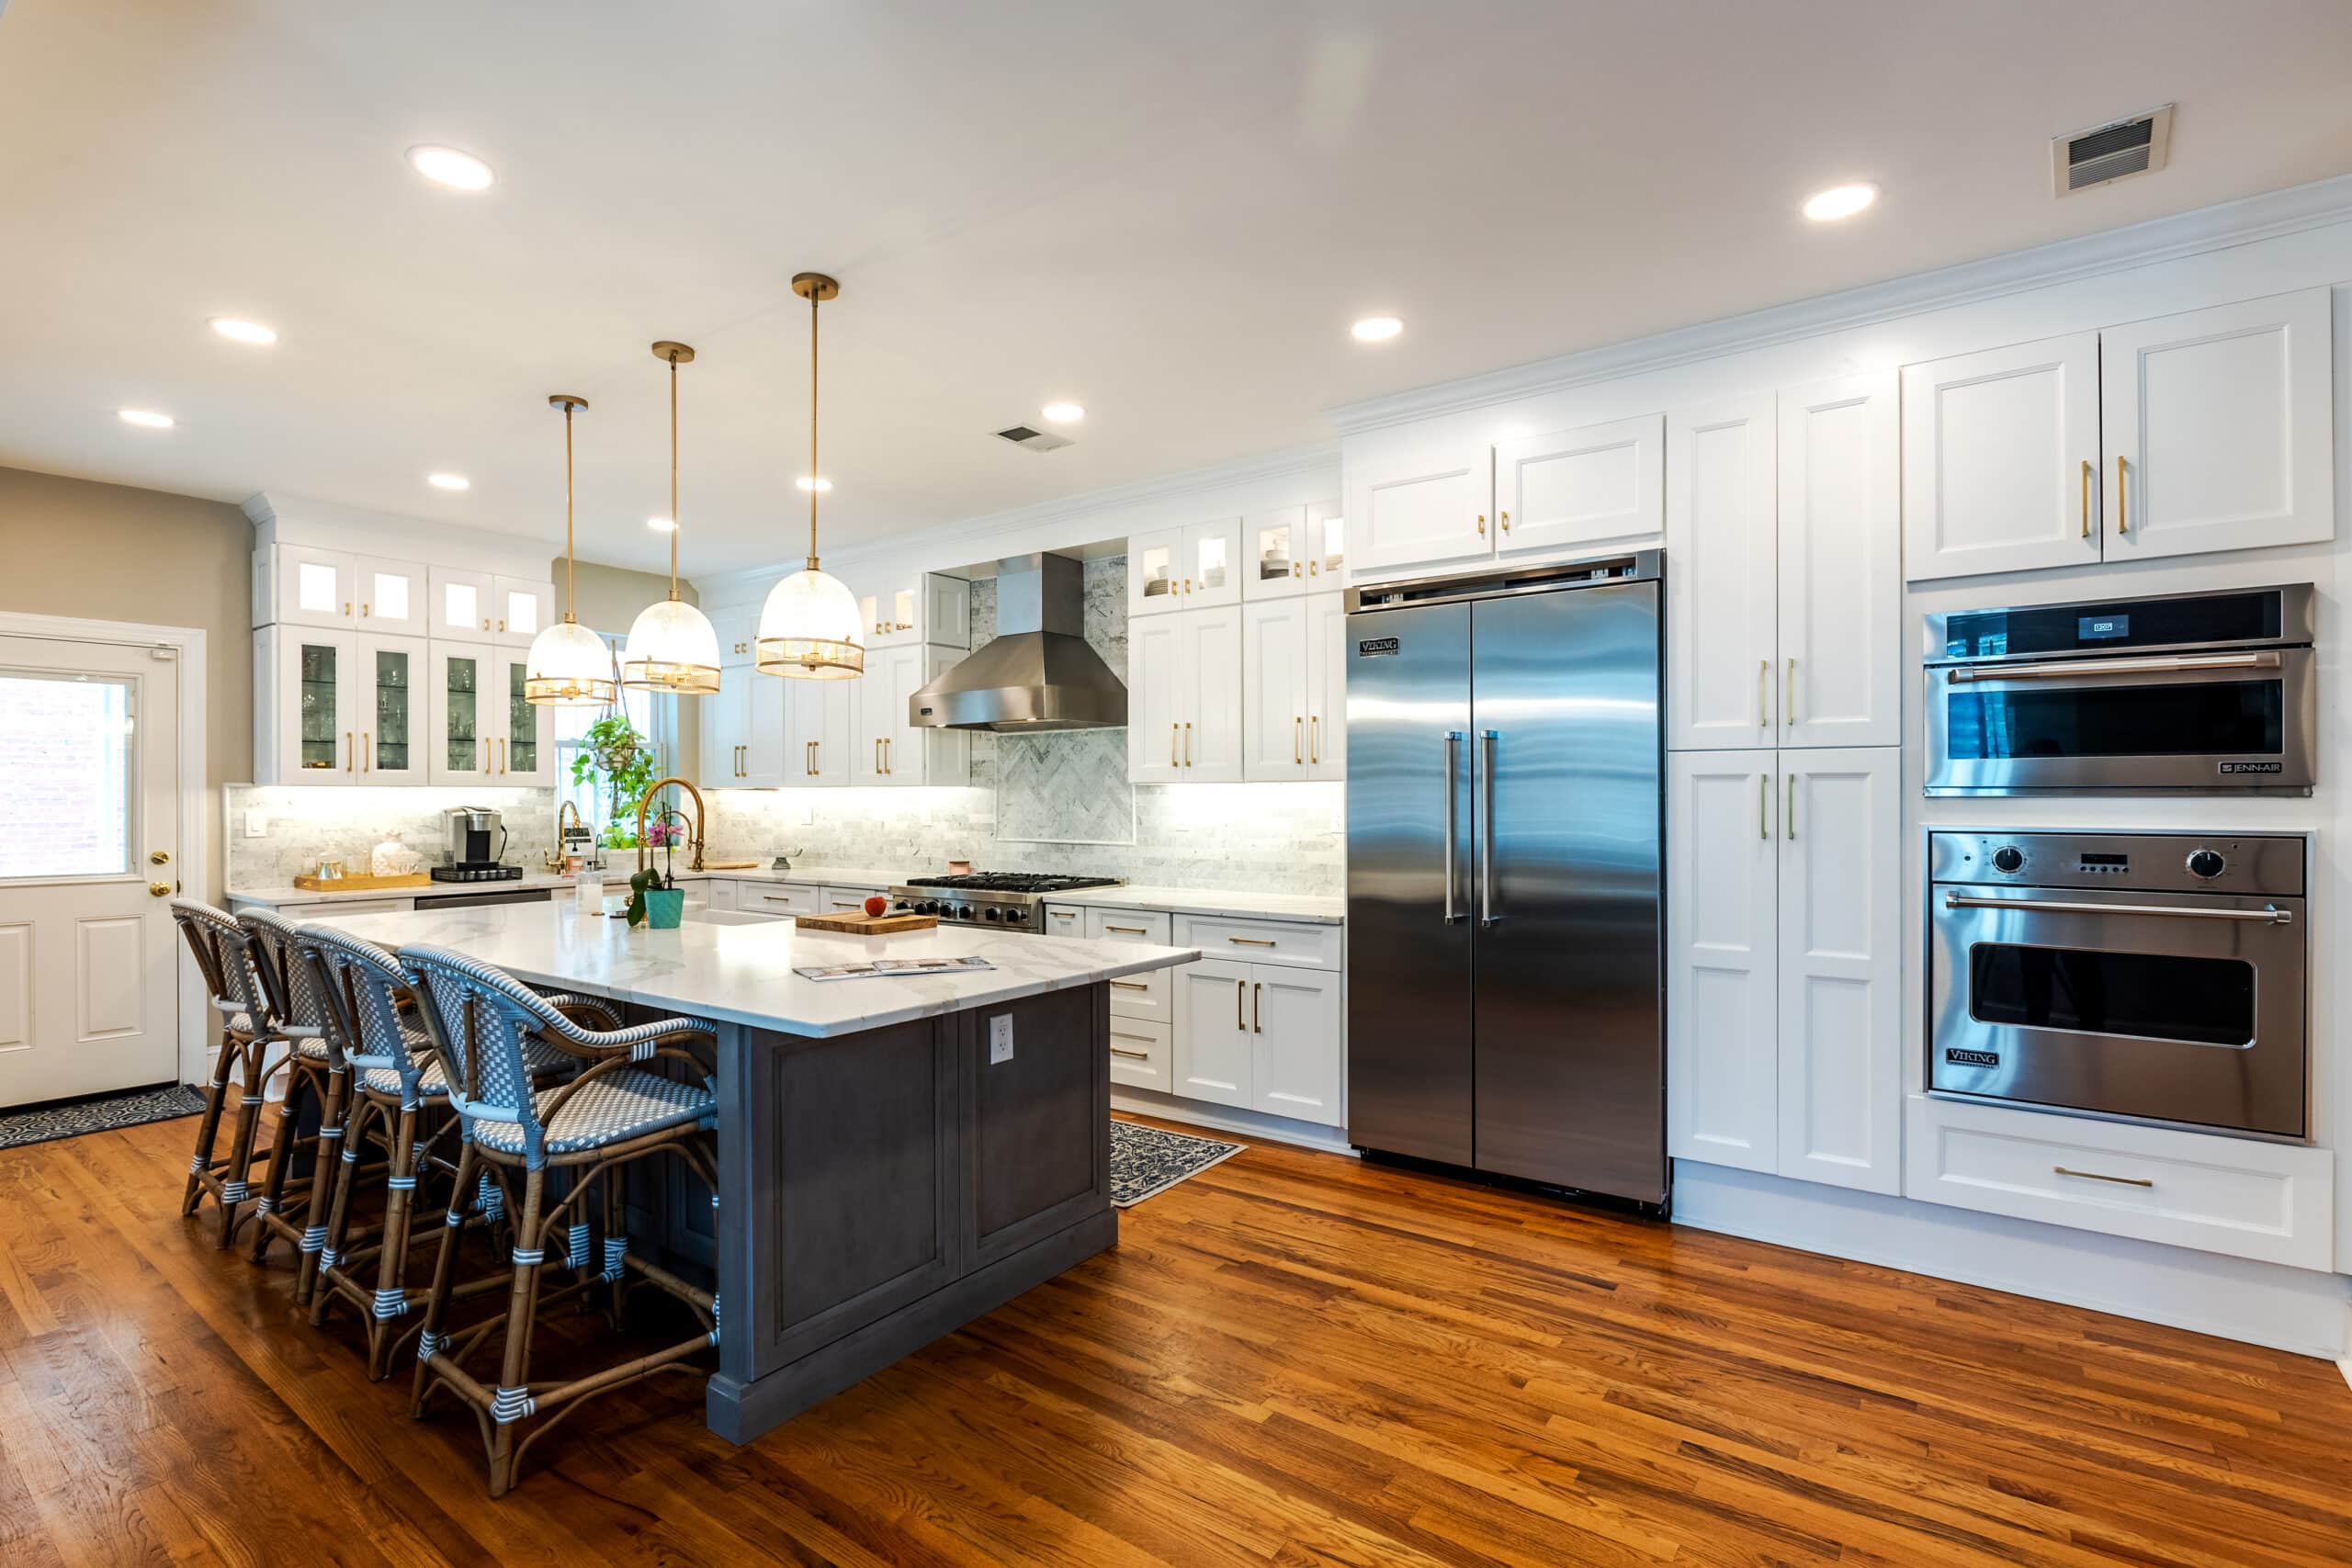 A kitchen with sleek white cabinets and modern stainless steel appliances